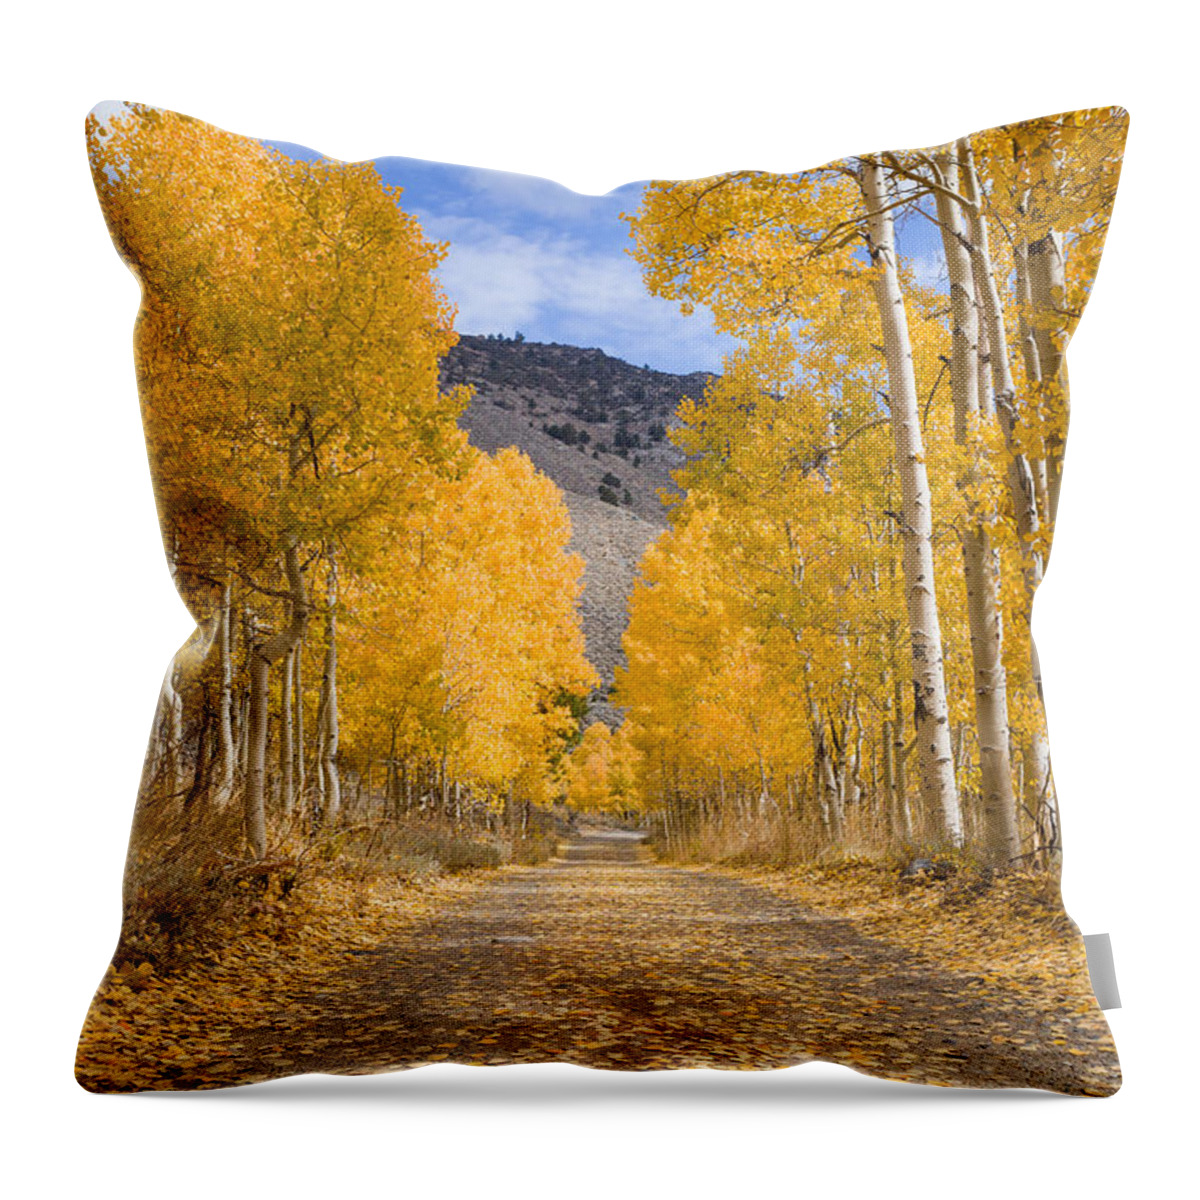 American Aspens Throw Pillow featuring the photograph Aspen Lane Wide Crop by Priya Ghose